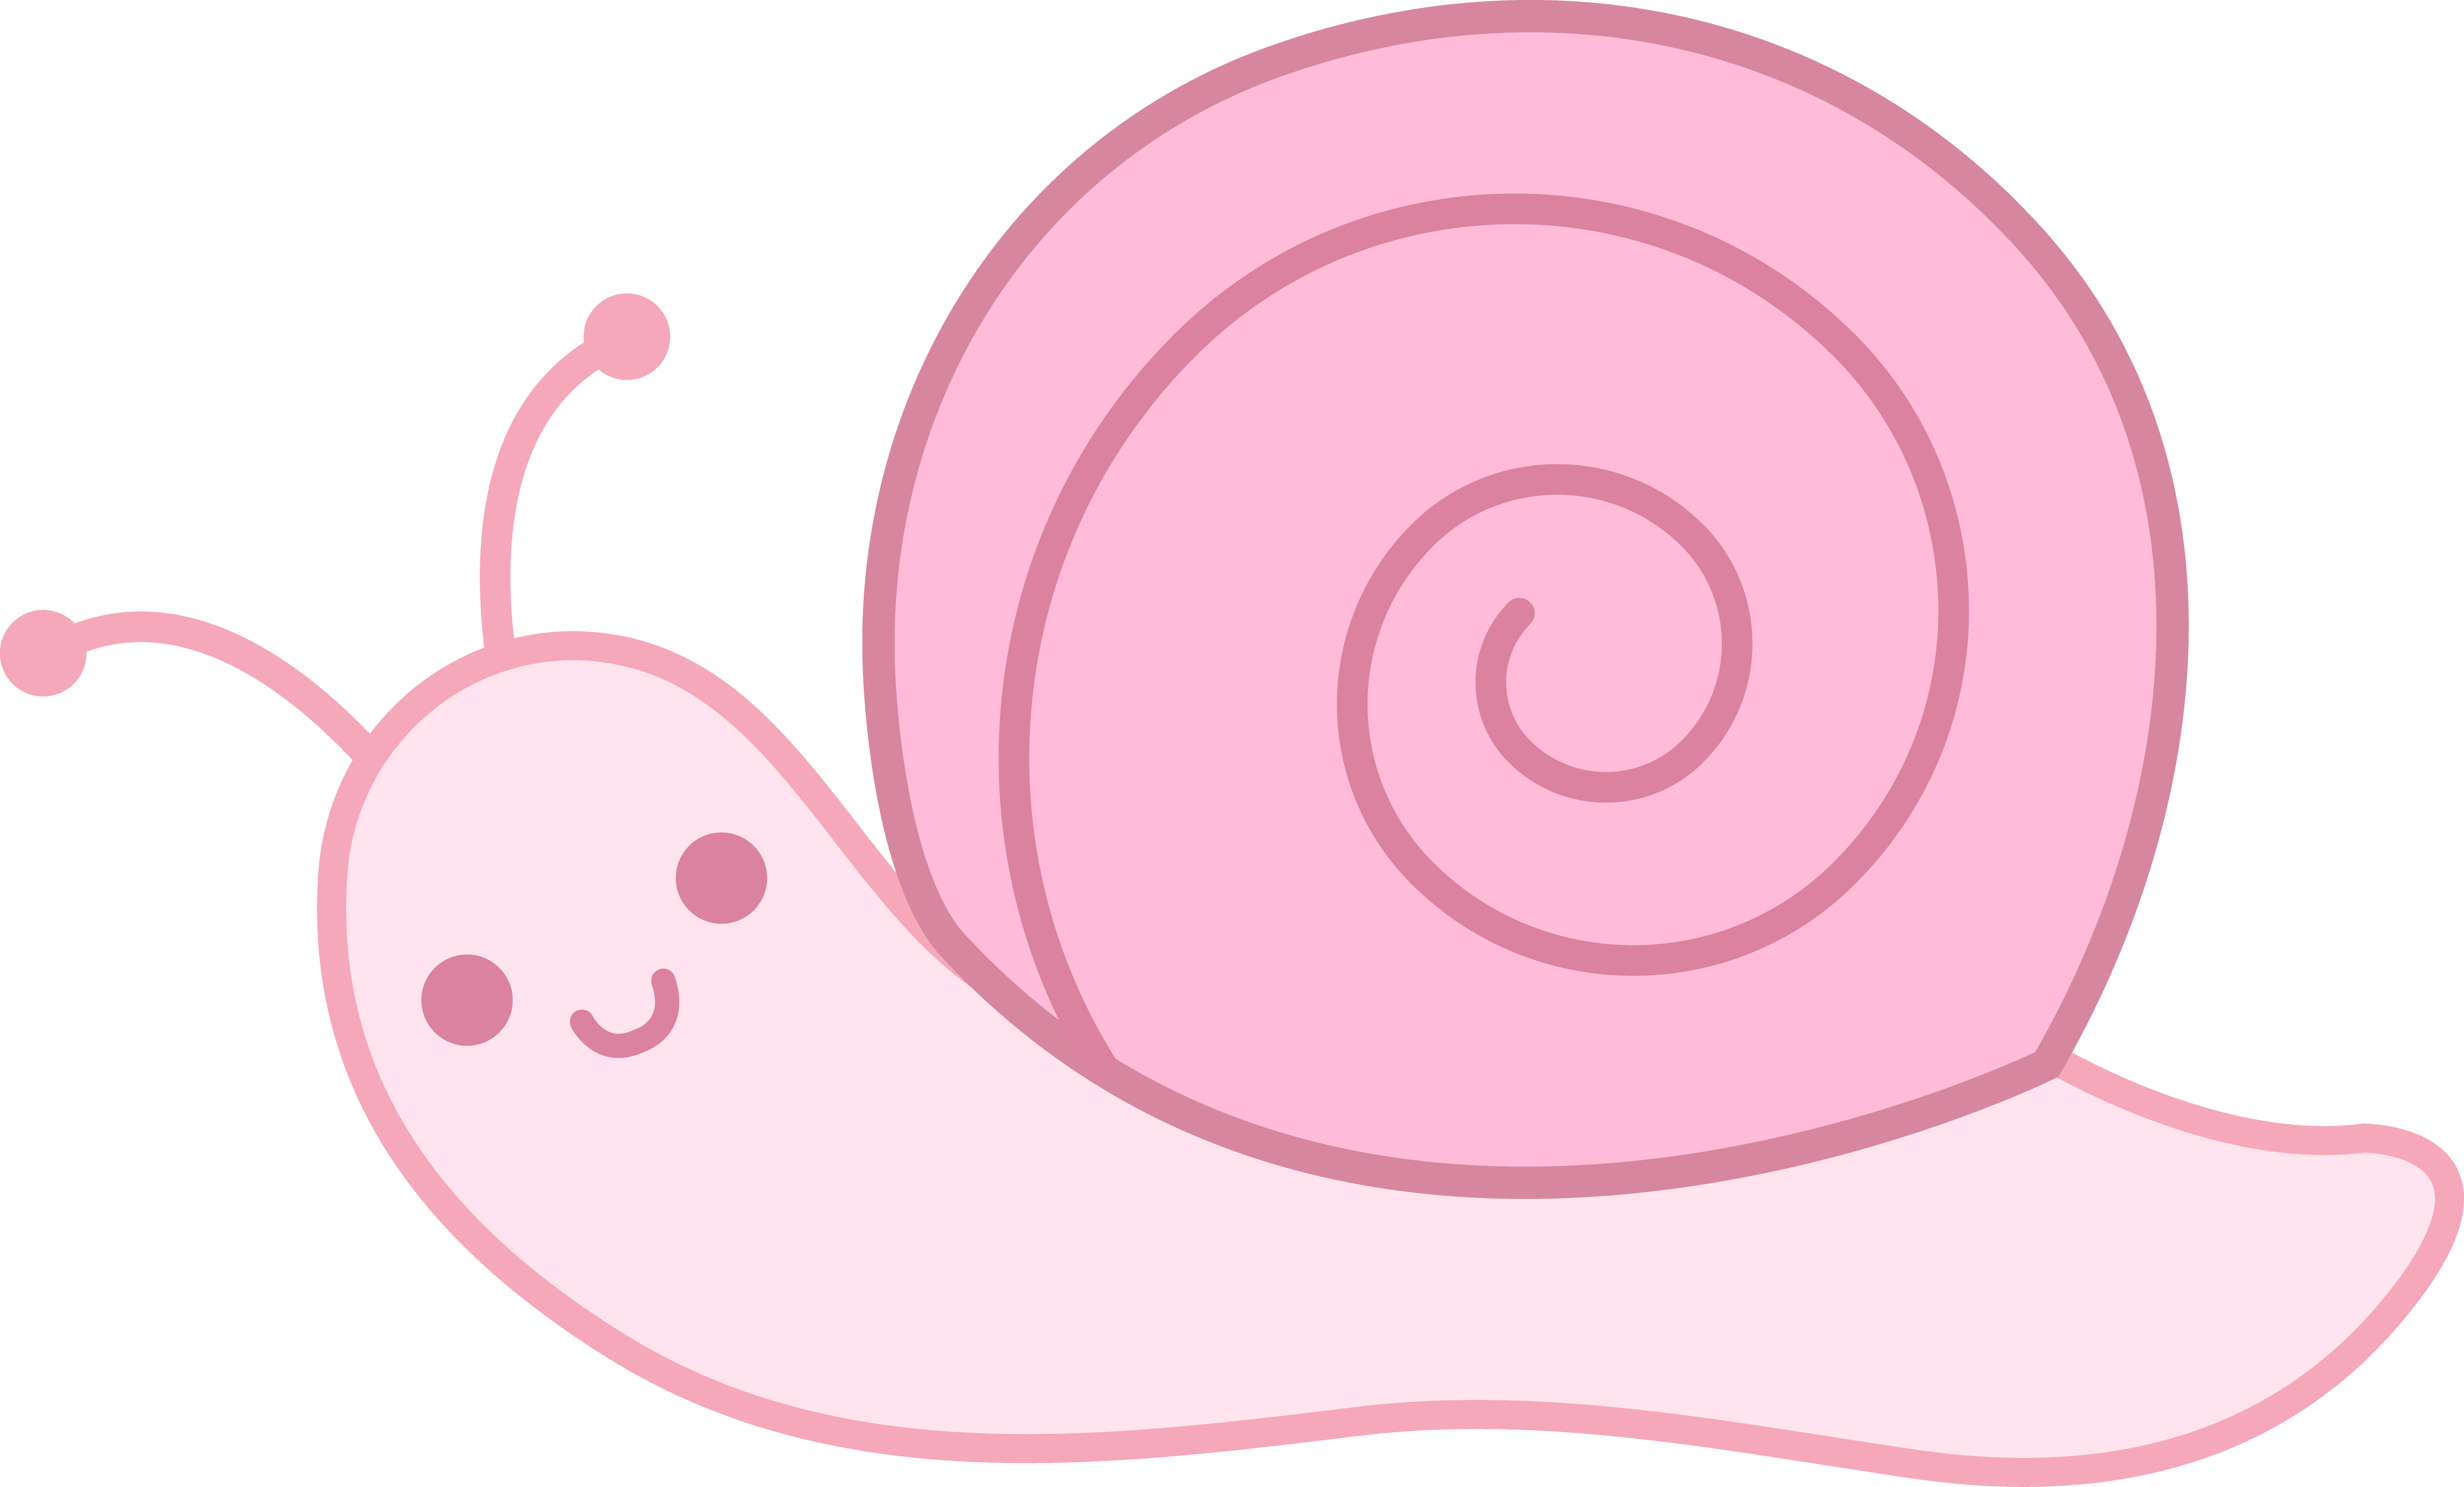 Cute pink snail free clip art | Black Background and some PPT Template